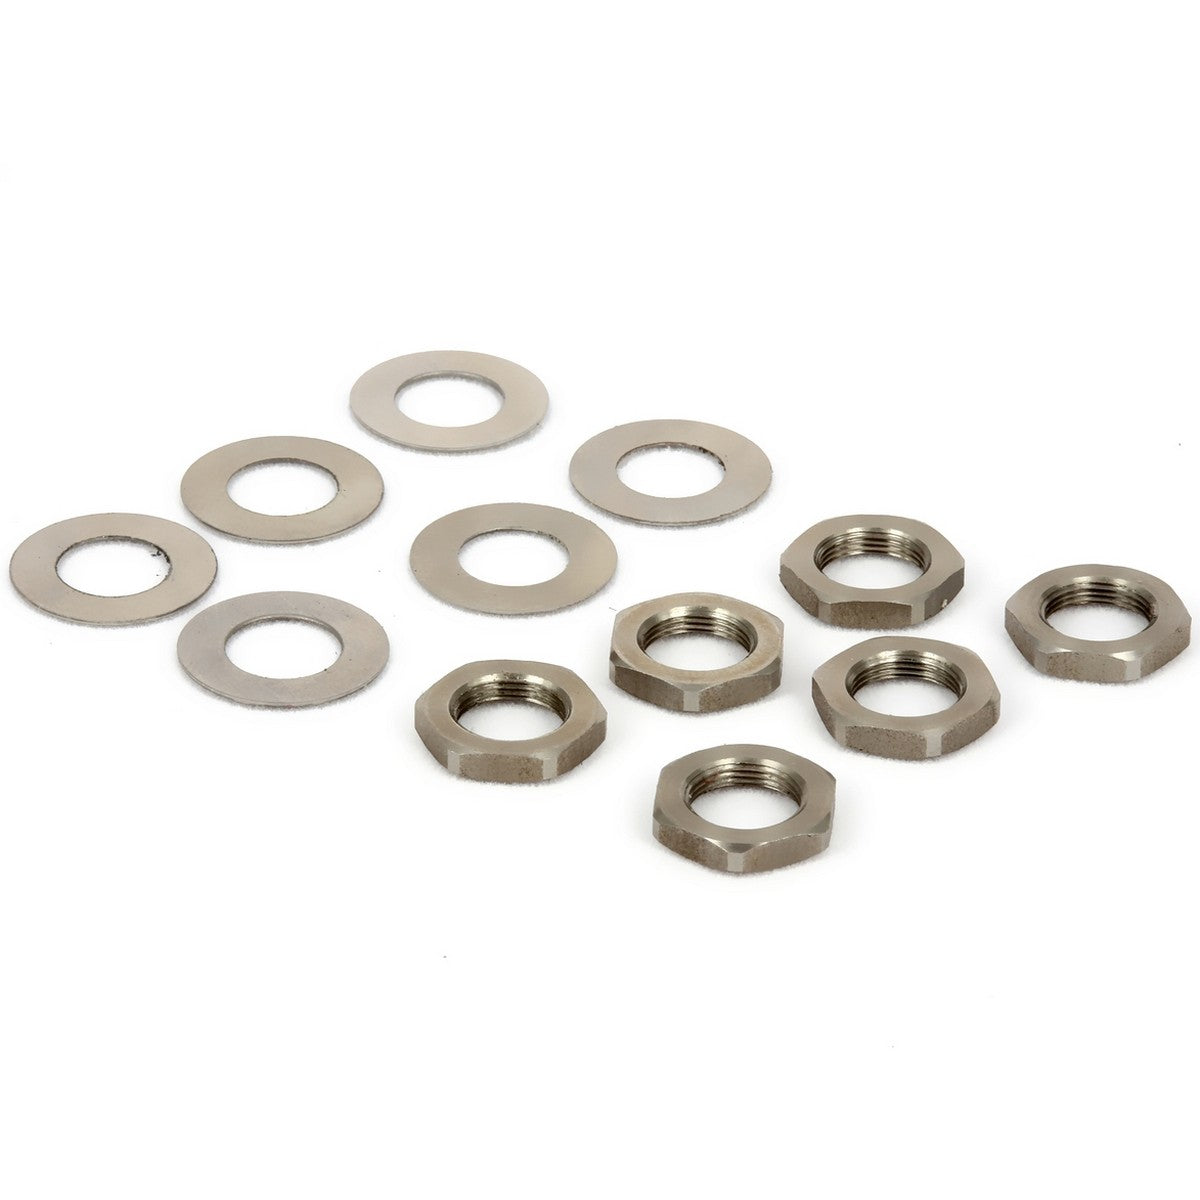 Tronical Hex Nuts and Washers | Nuts Washers for TronicalTune RoboHeads Nickel Set of 6